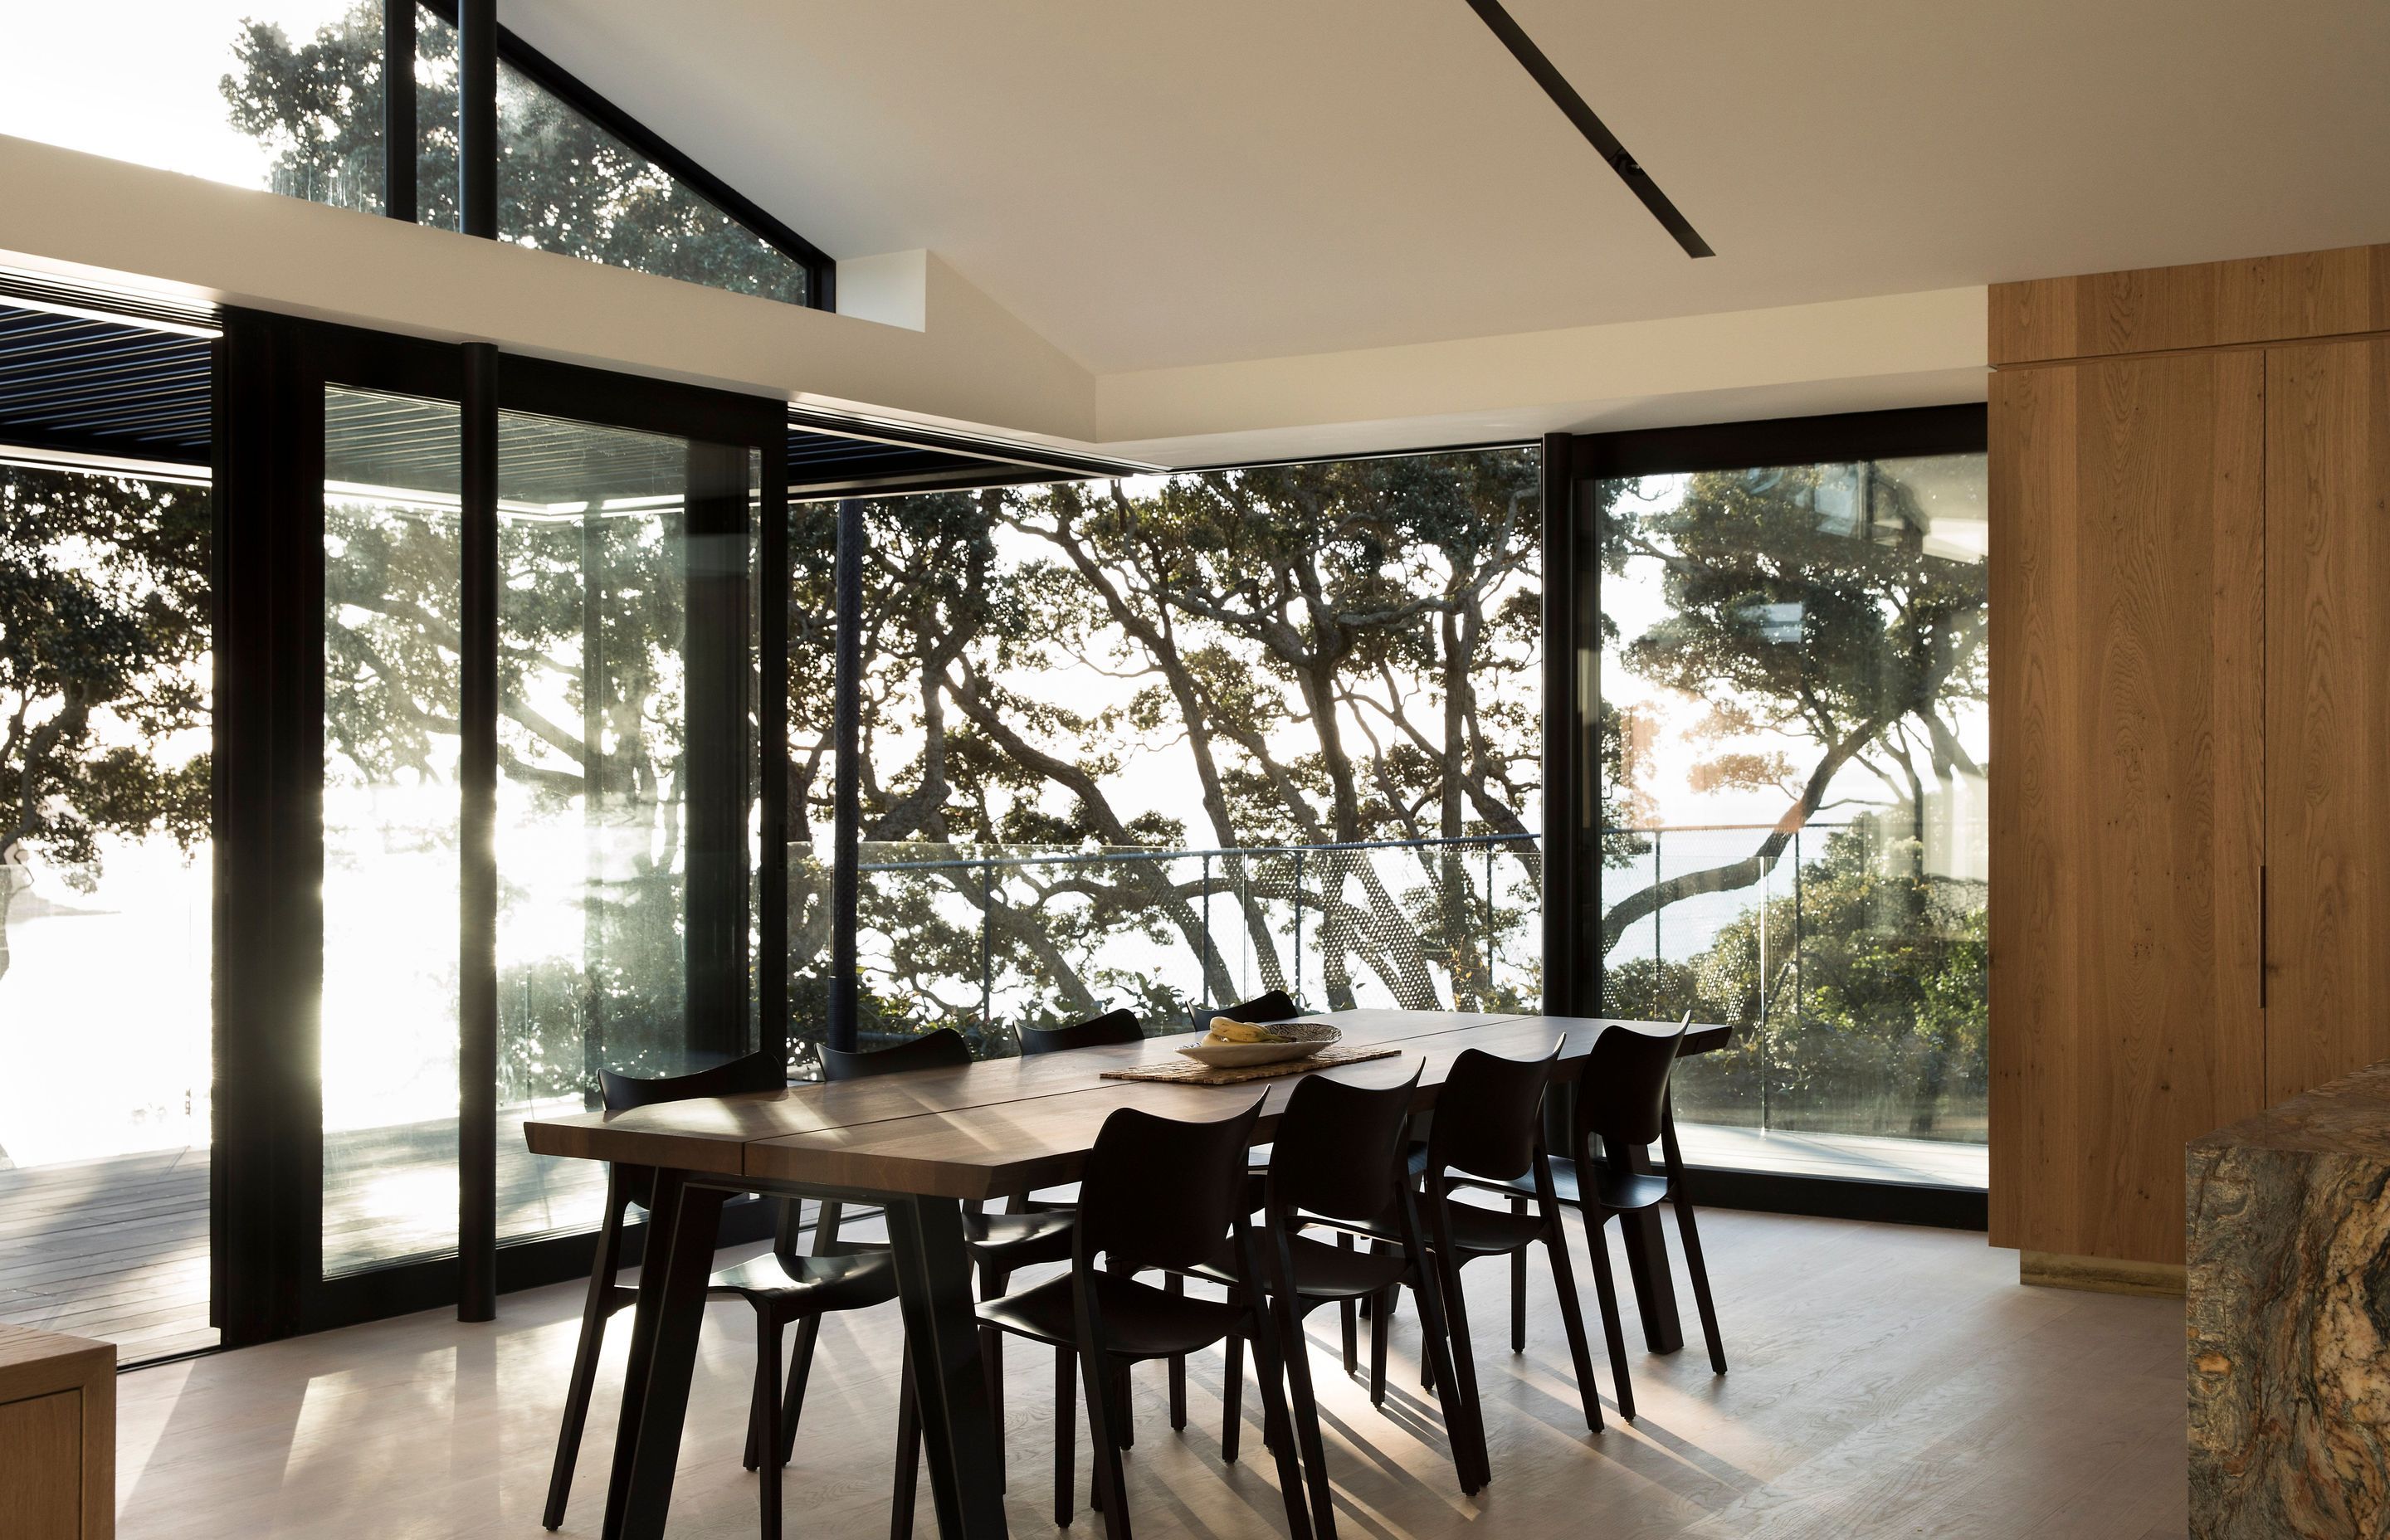 The dining area captures the light from the north-west and as it tracks across the sky during the day, casting beautiful shadows into the interior.